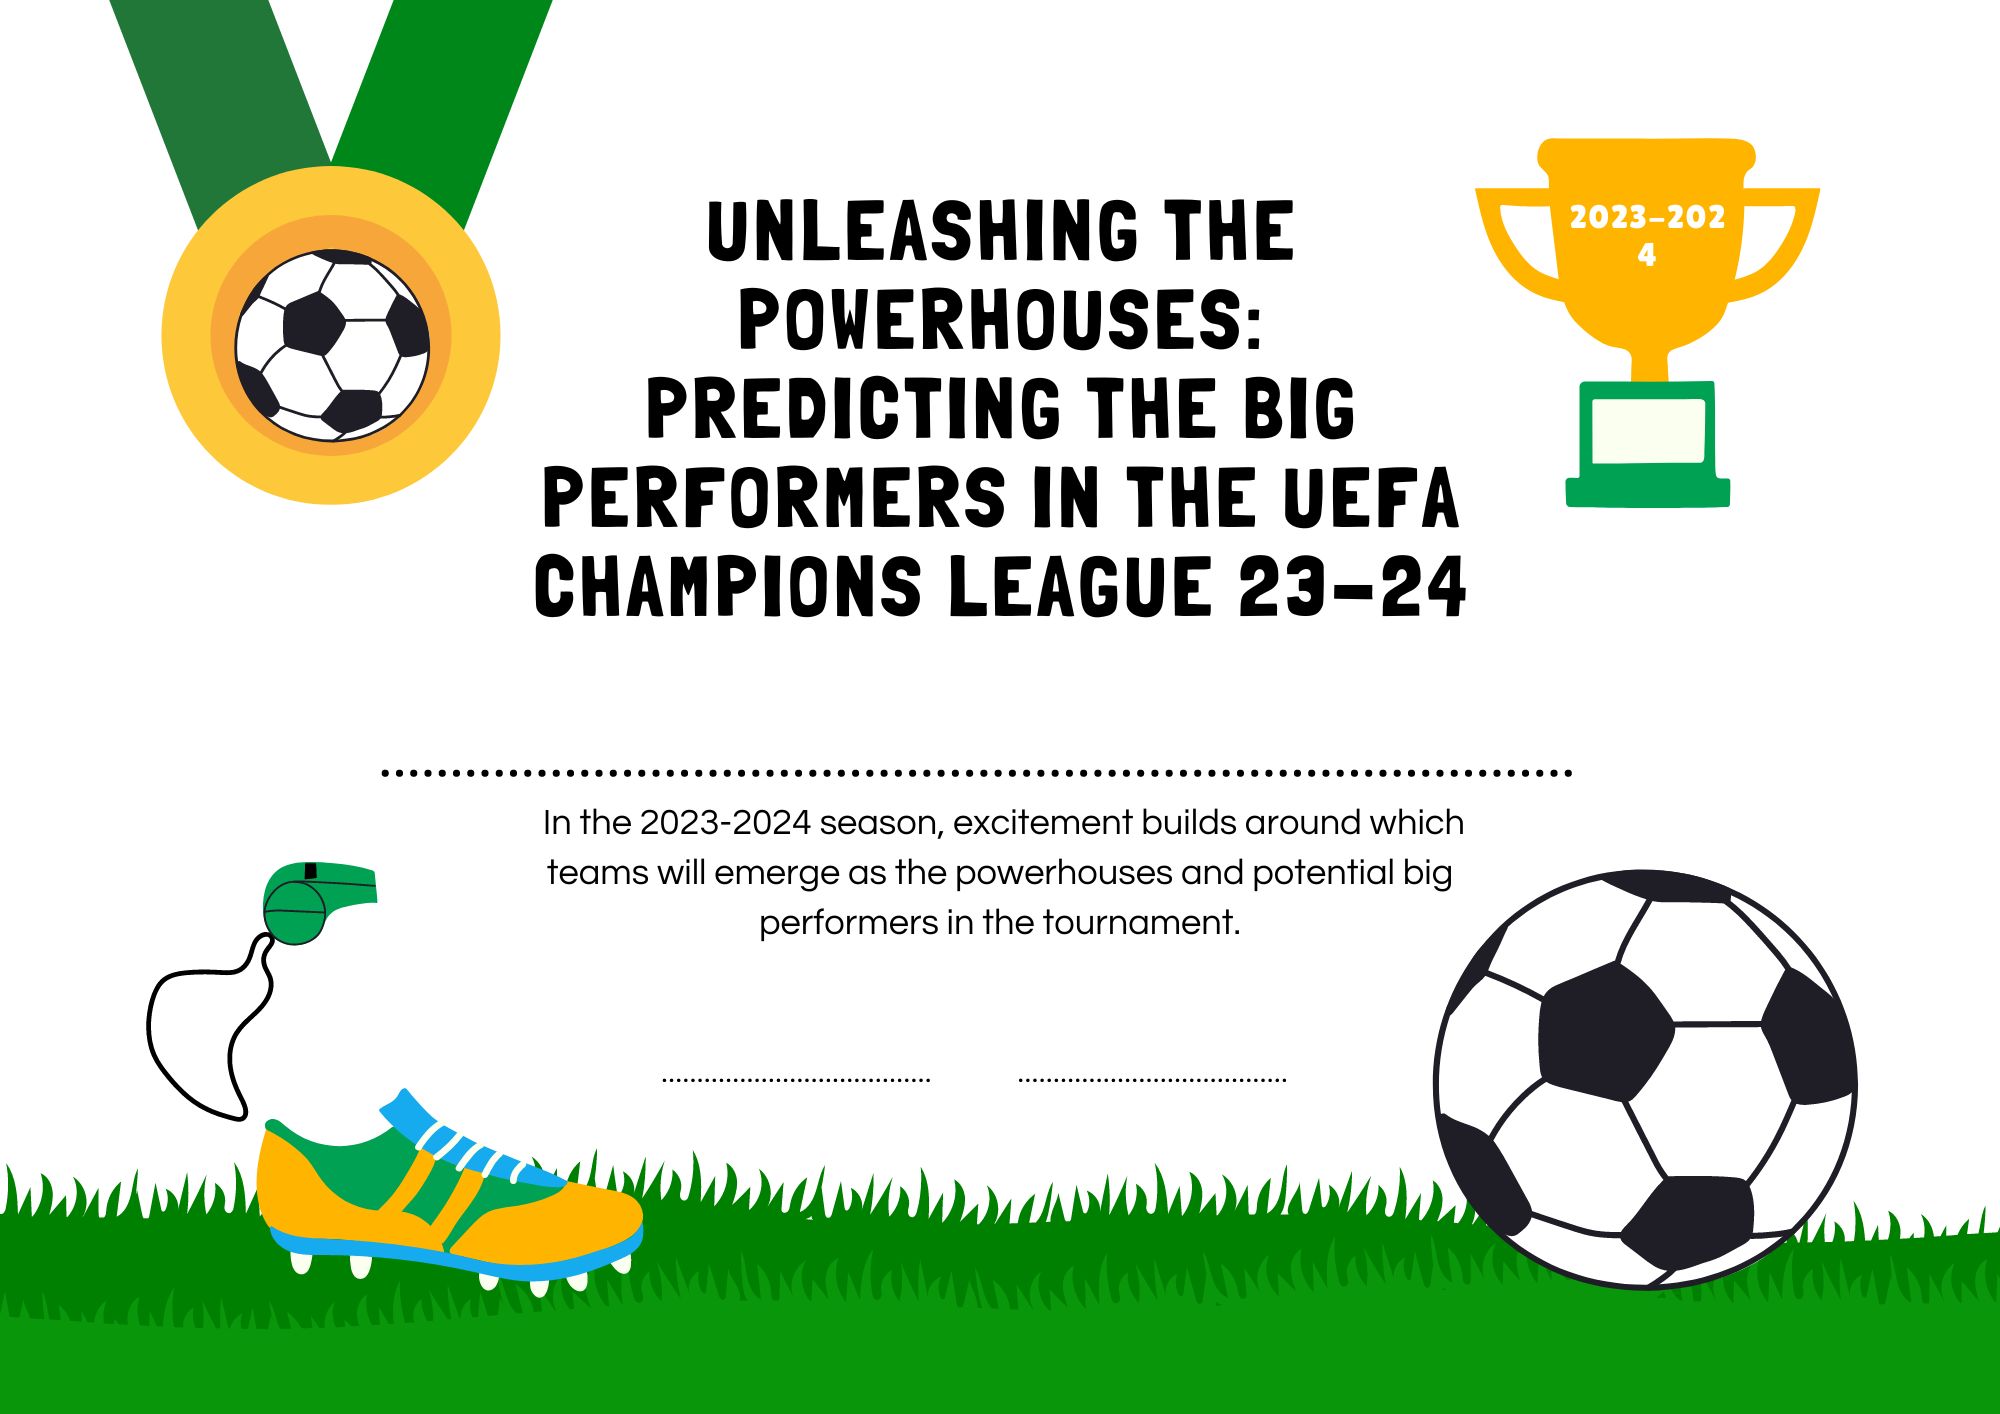 unleashing-the-powerhouses-predicting-the-big-performers-in-the-uefa-champions-league-23-24